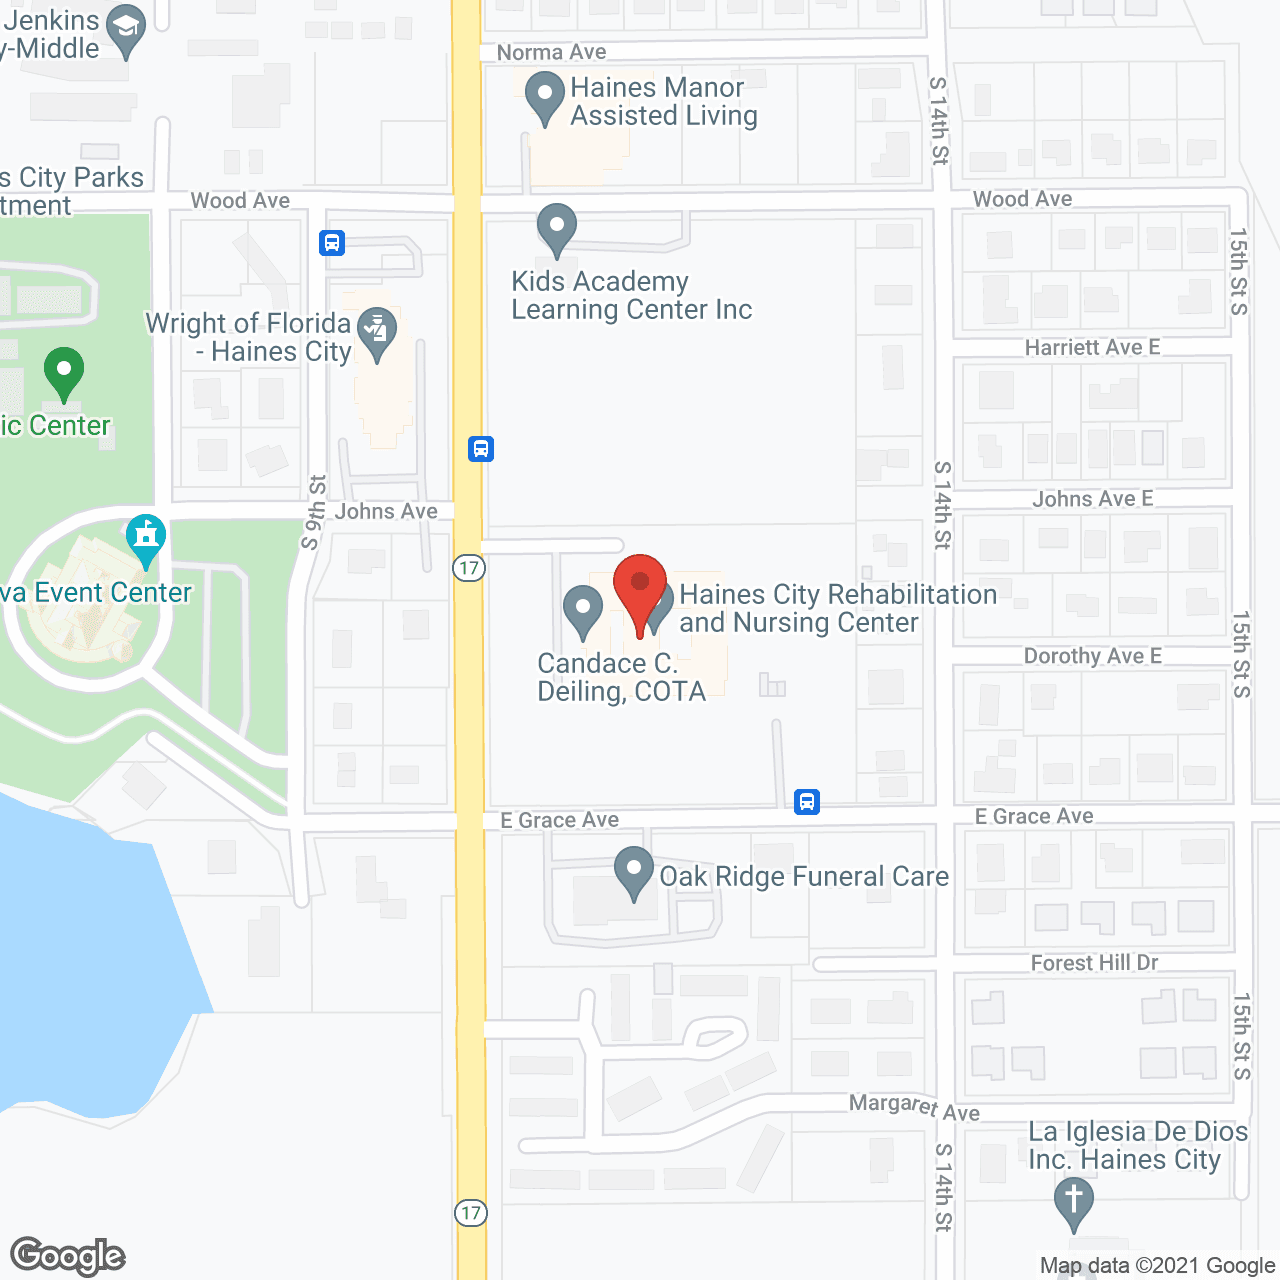 Haines City Health Care Ctr in google map